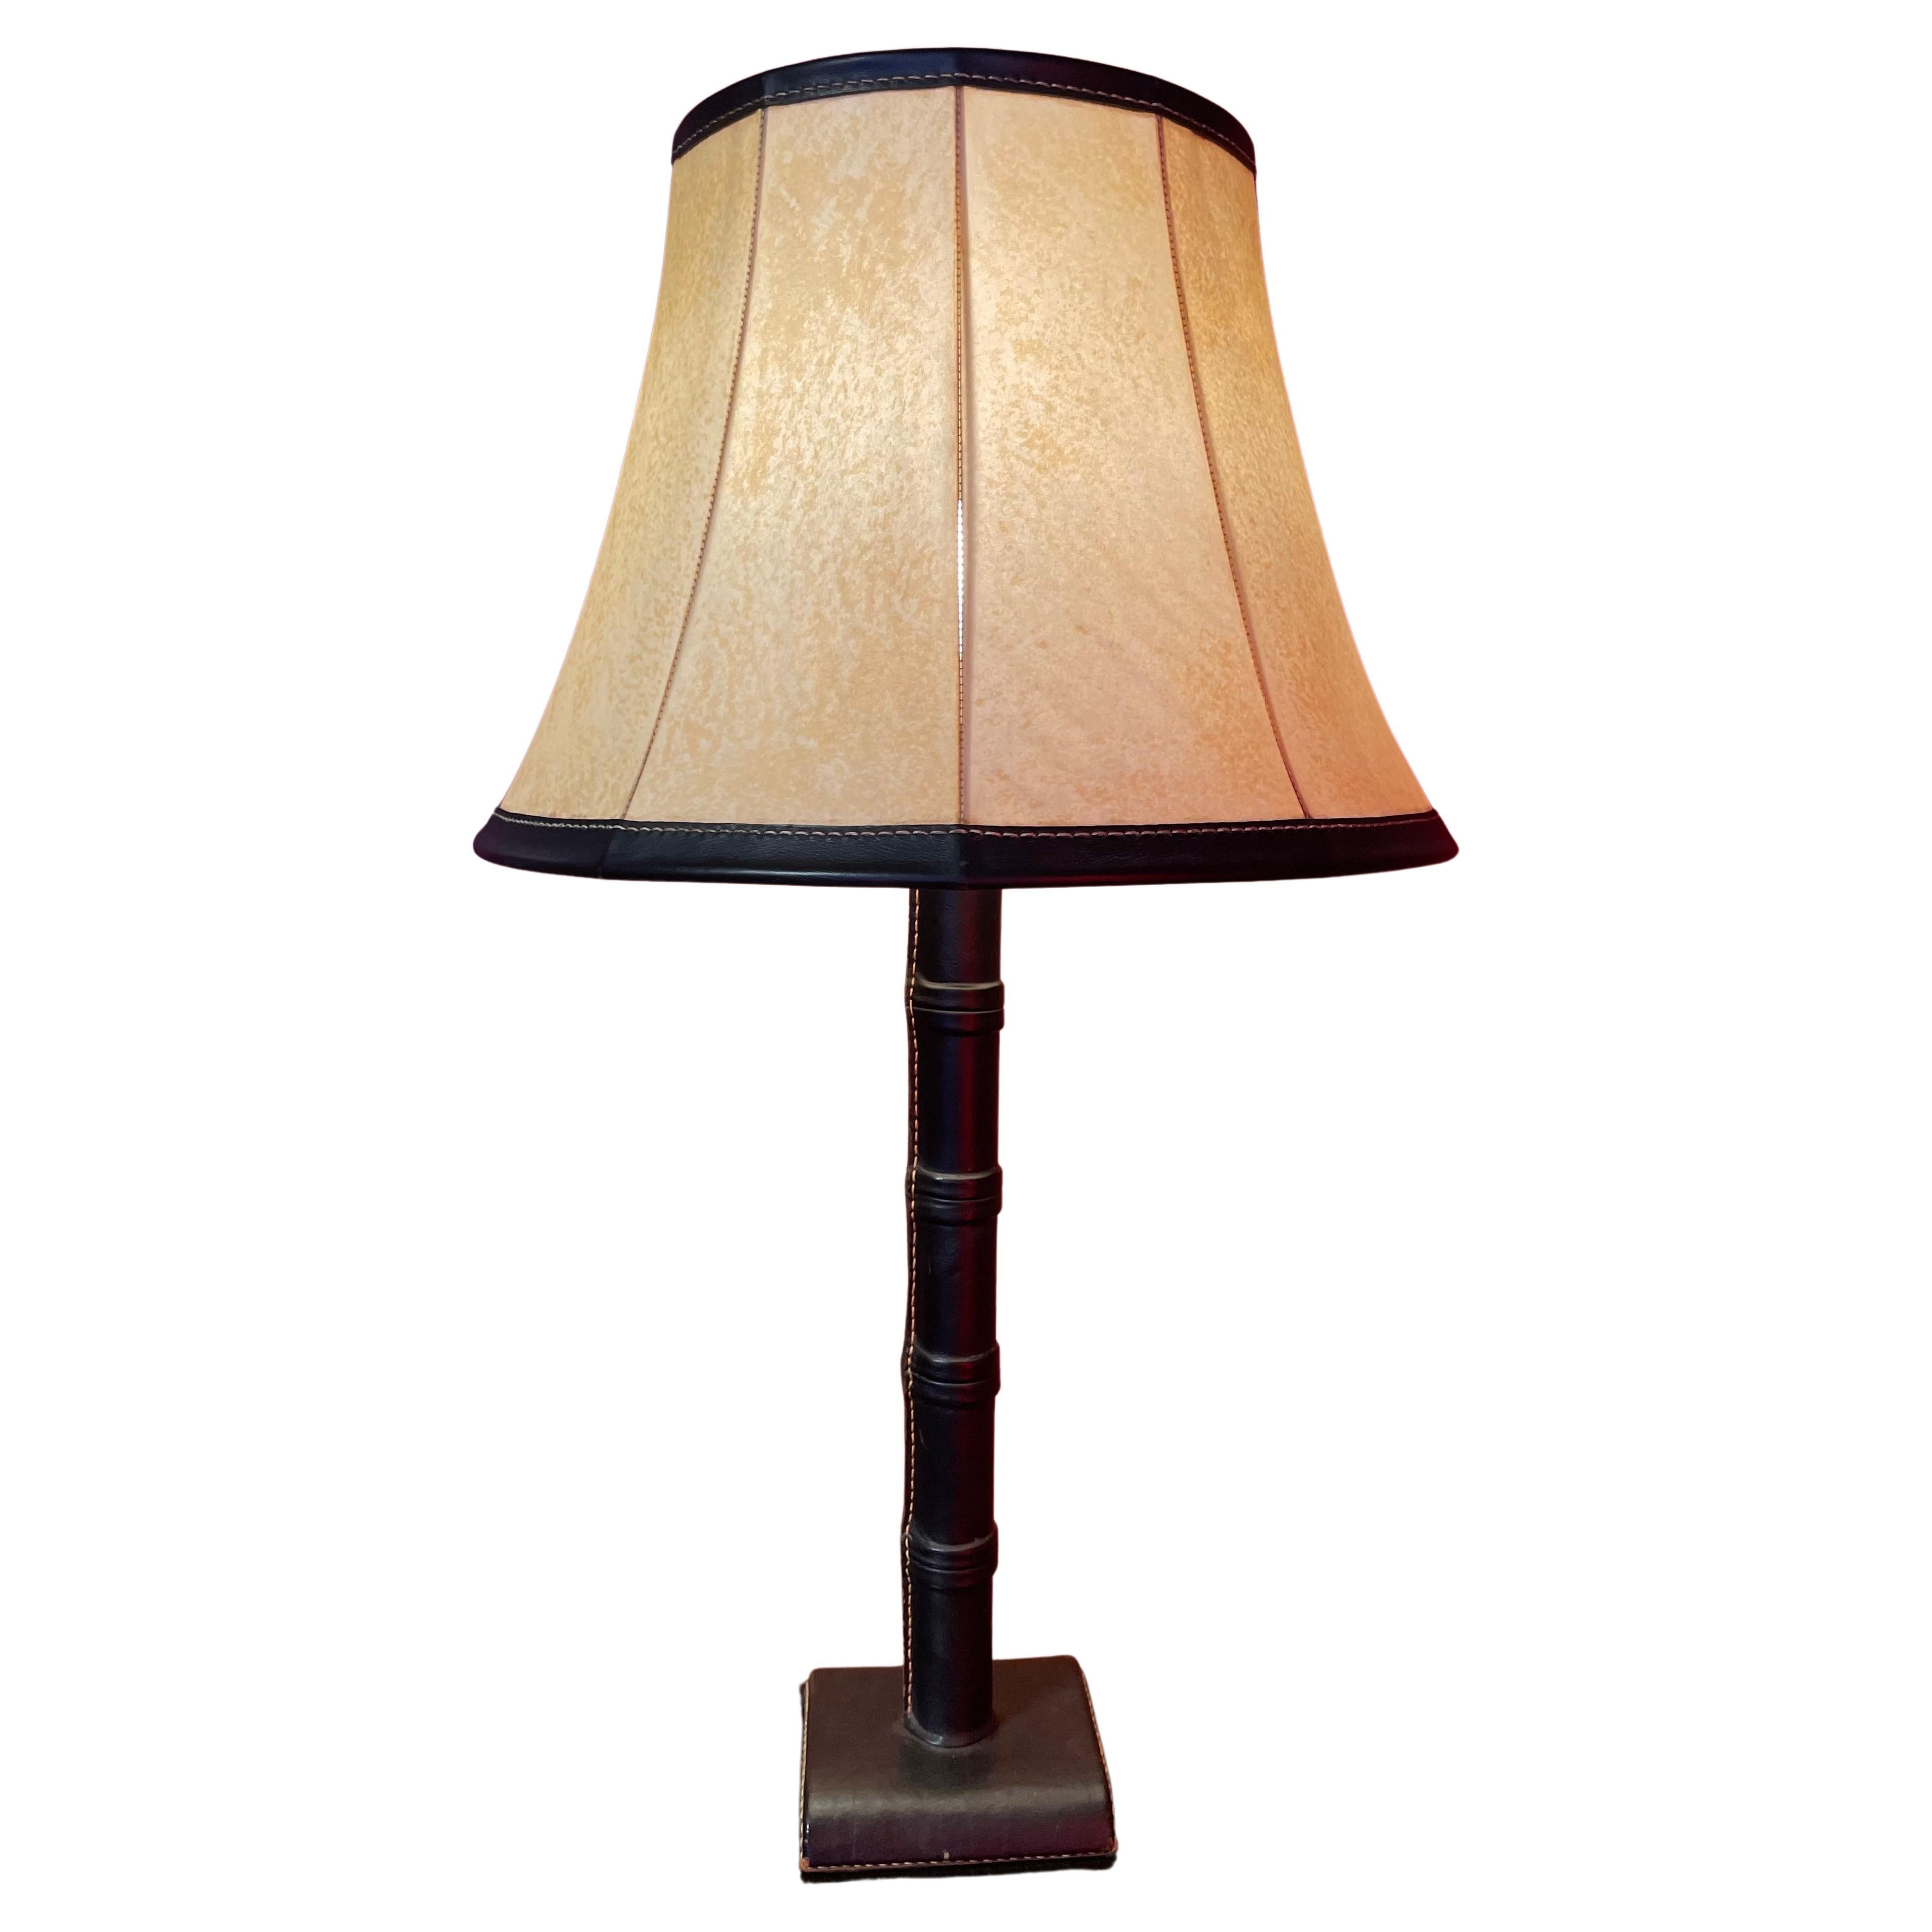 Jacques Adnet Hand Stitched Leather Table Lamp